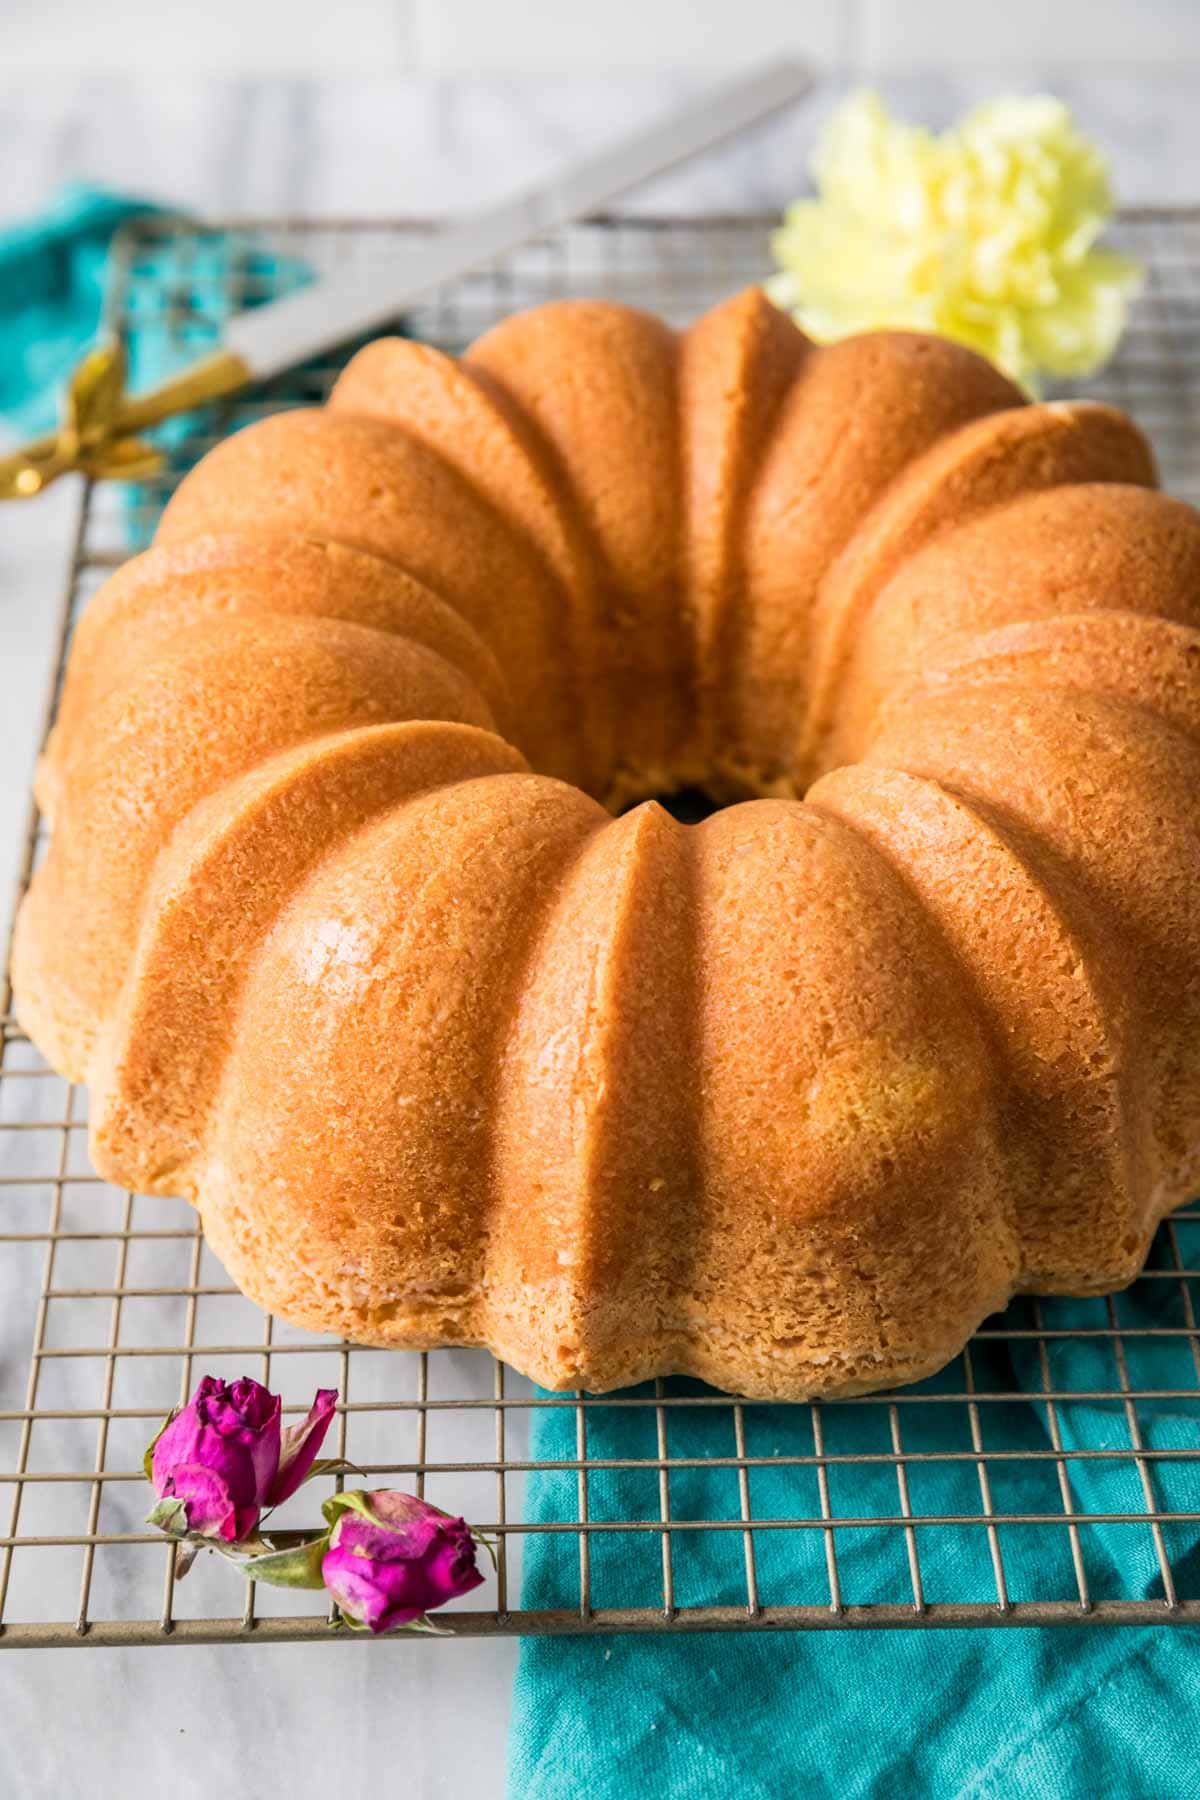 Whole pound cake that's been baked in a tube pan on a cooling rack with flowers.